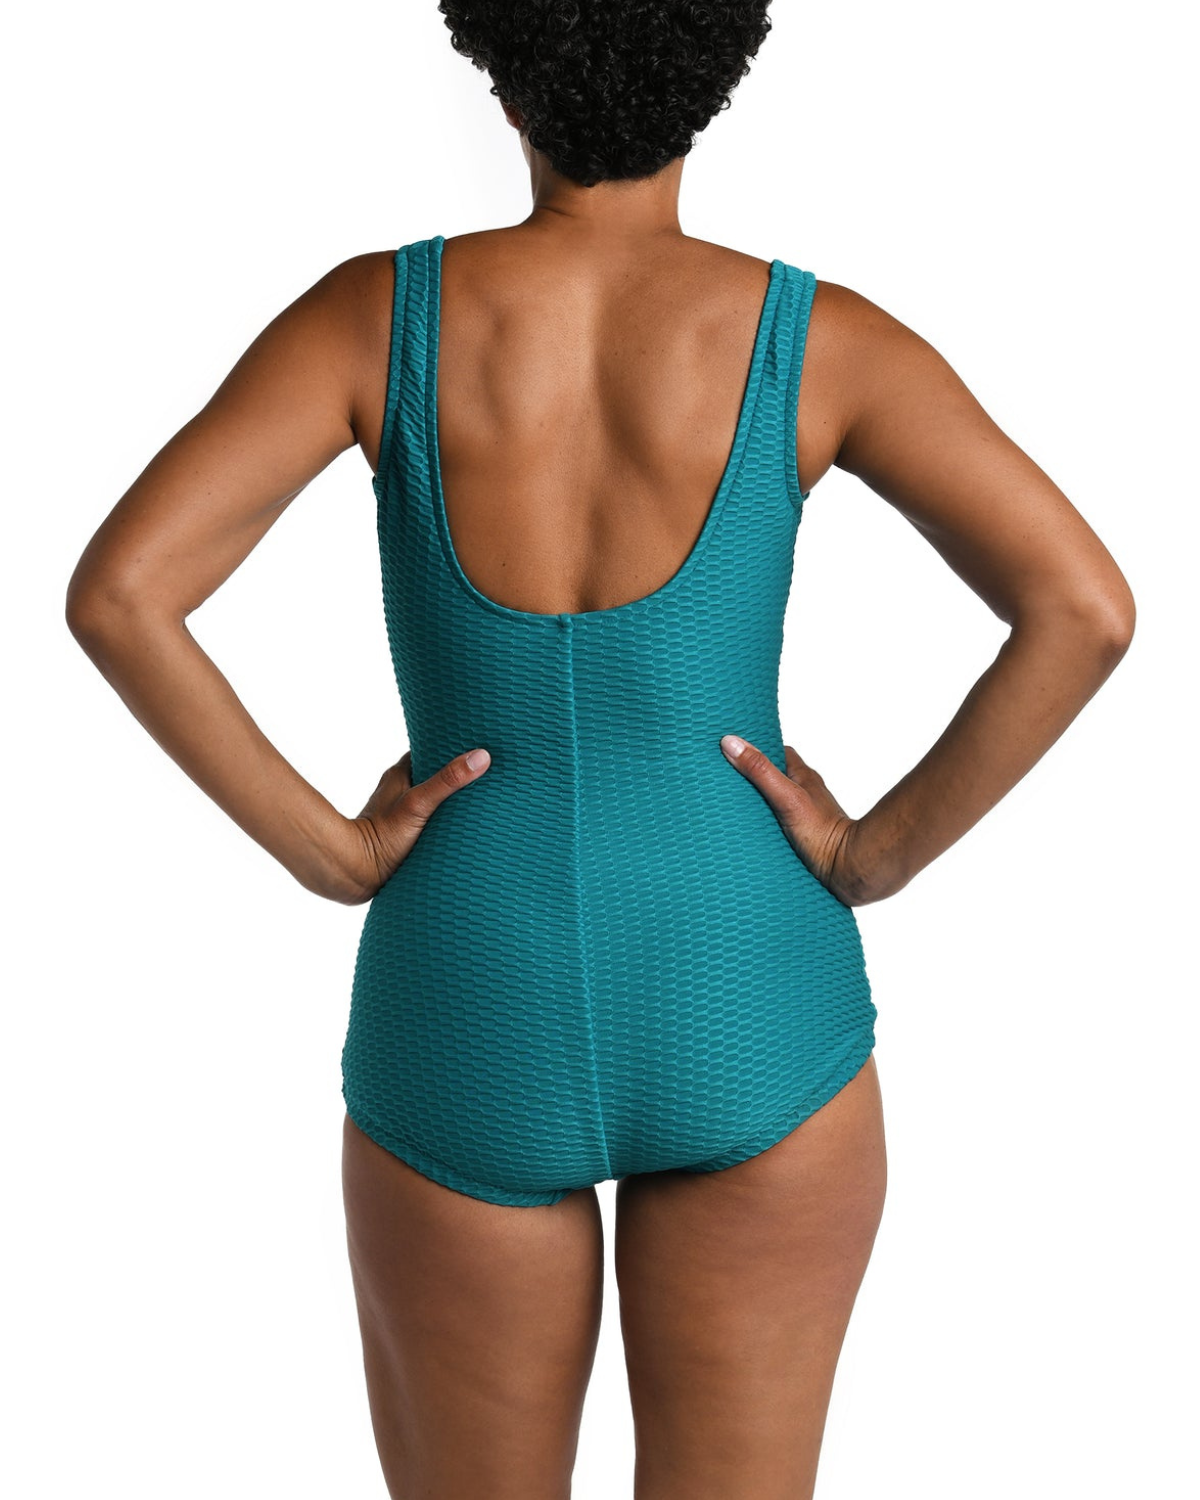 Model wearing a textured one piece swimsuit with a girl leg cut in emerald